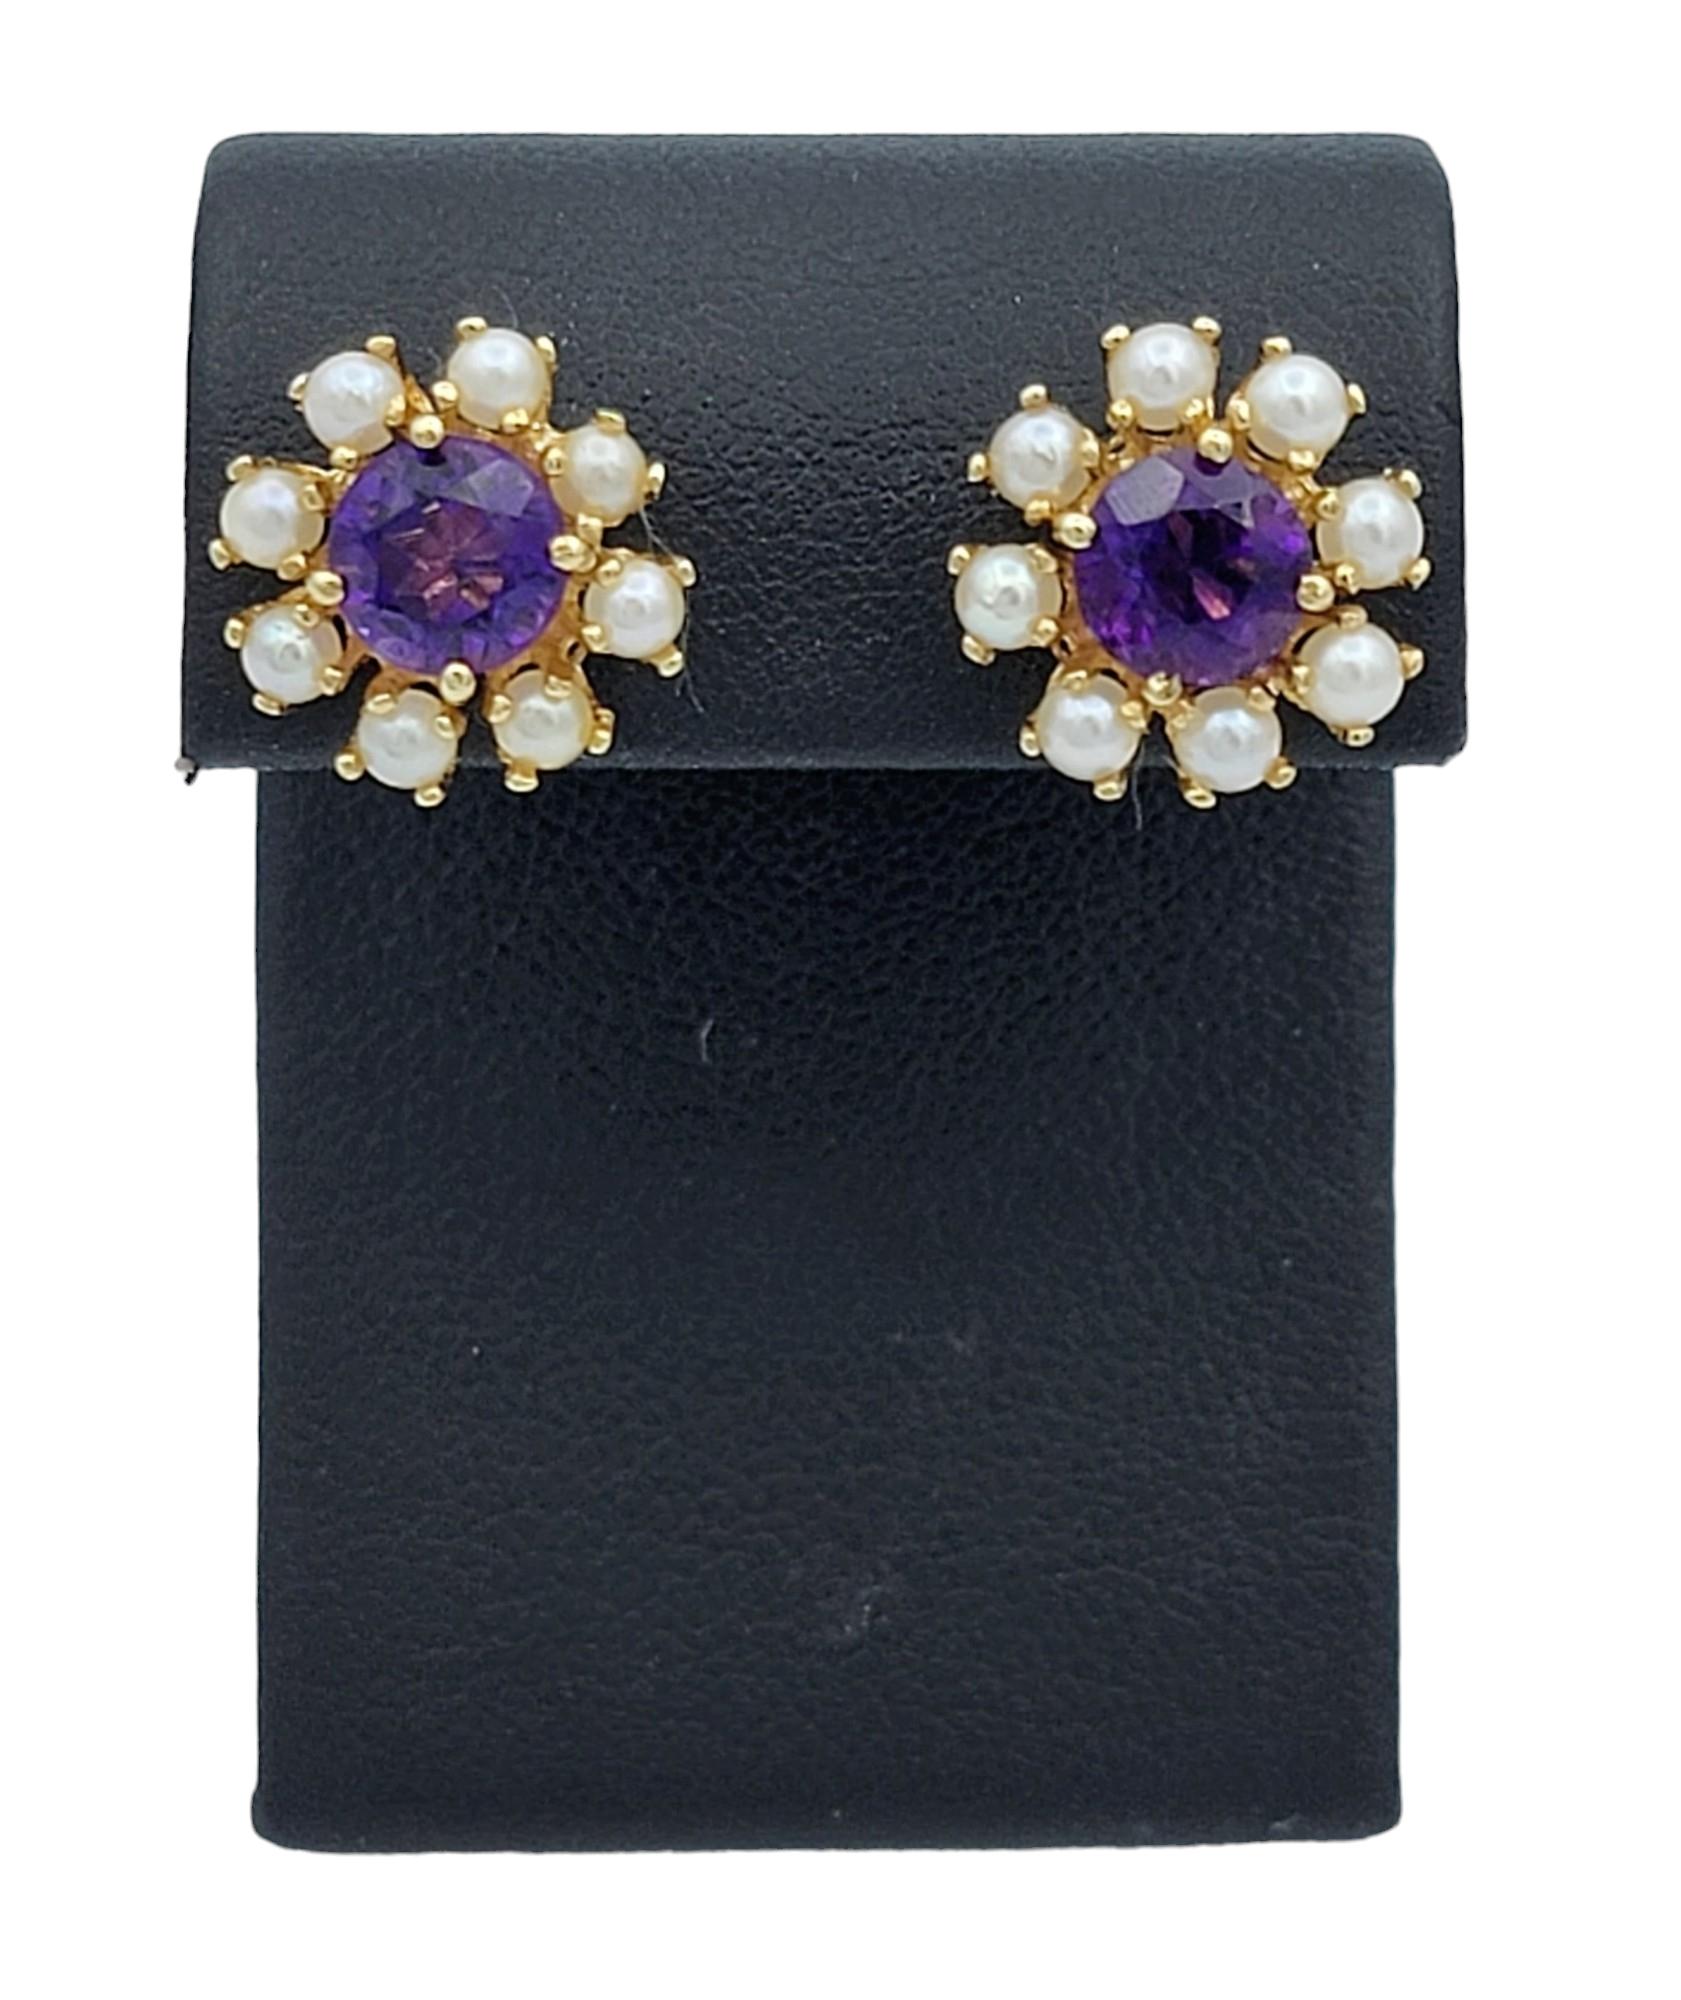 Women's Round Amethyst and White Pearl Halo Stud Earrings Set in 14 Karat Yellow Gold For Sale